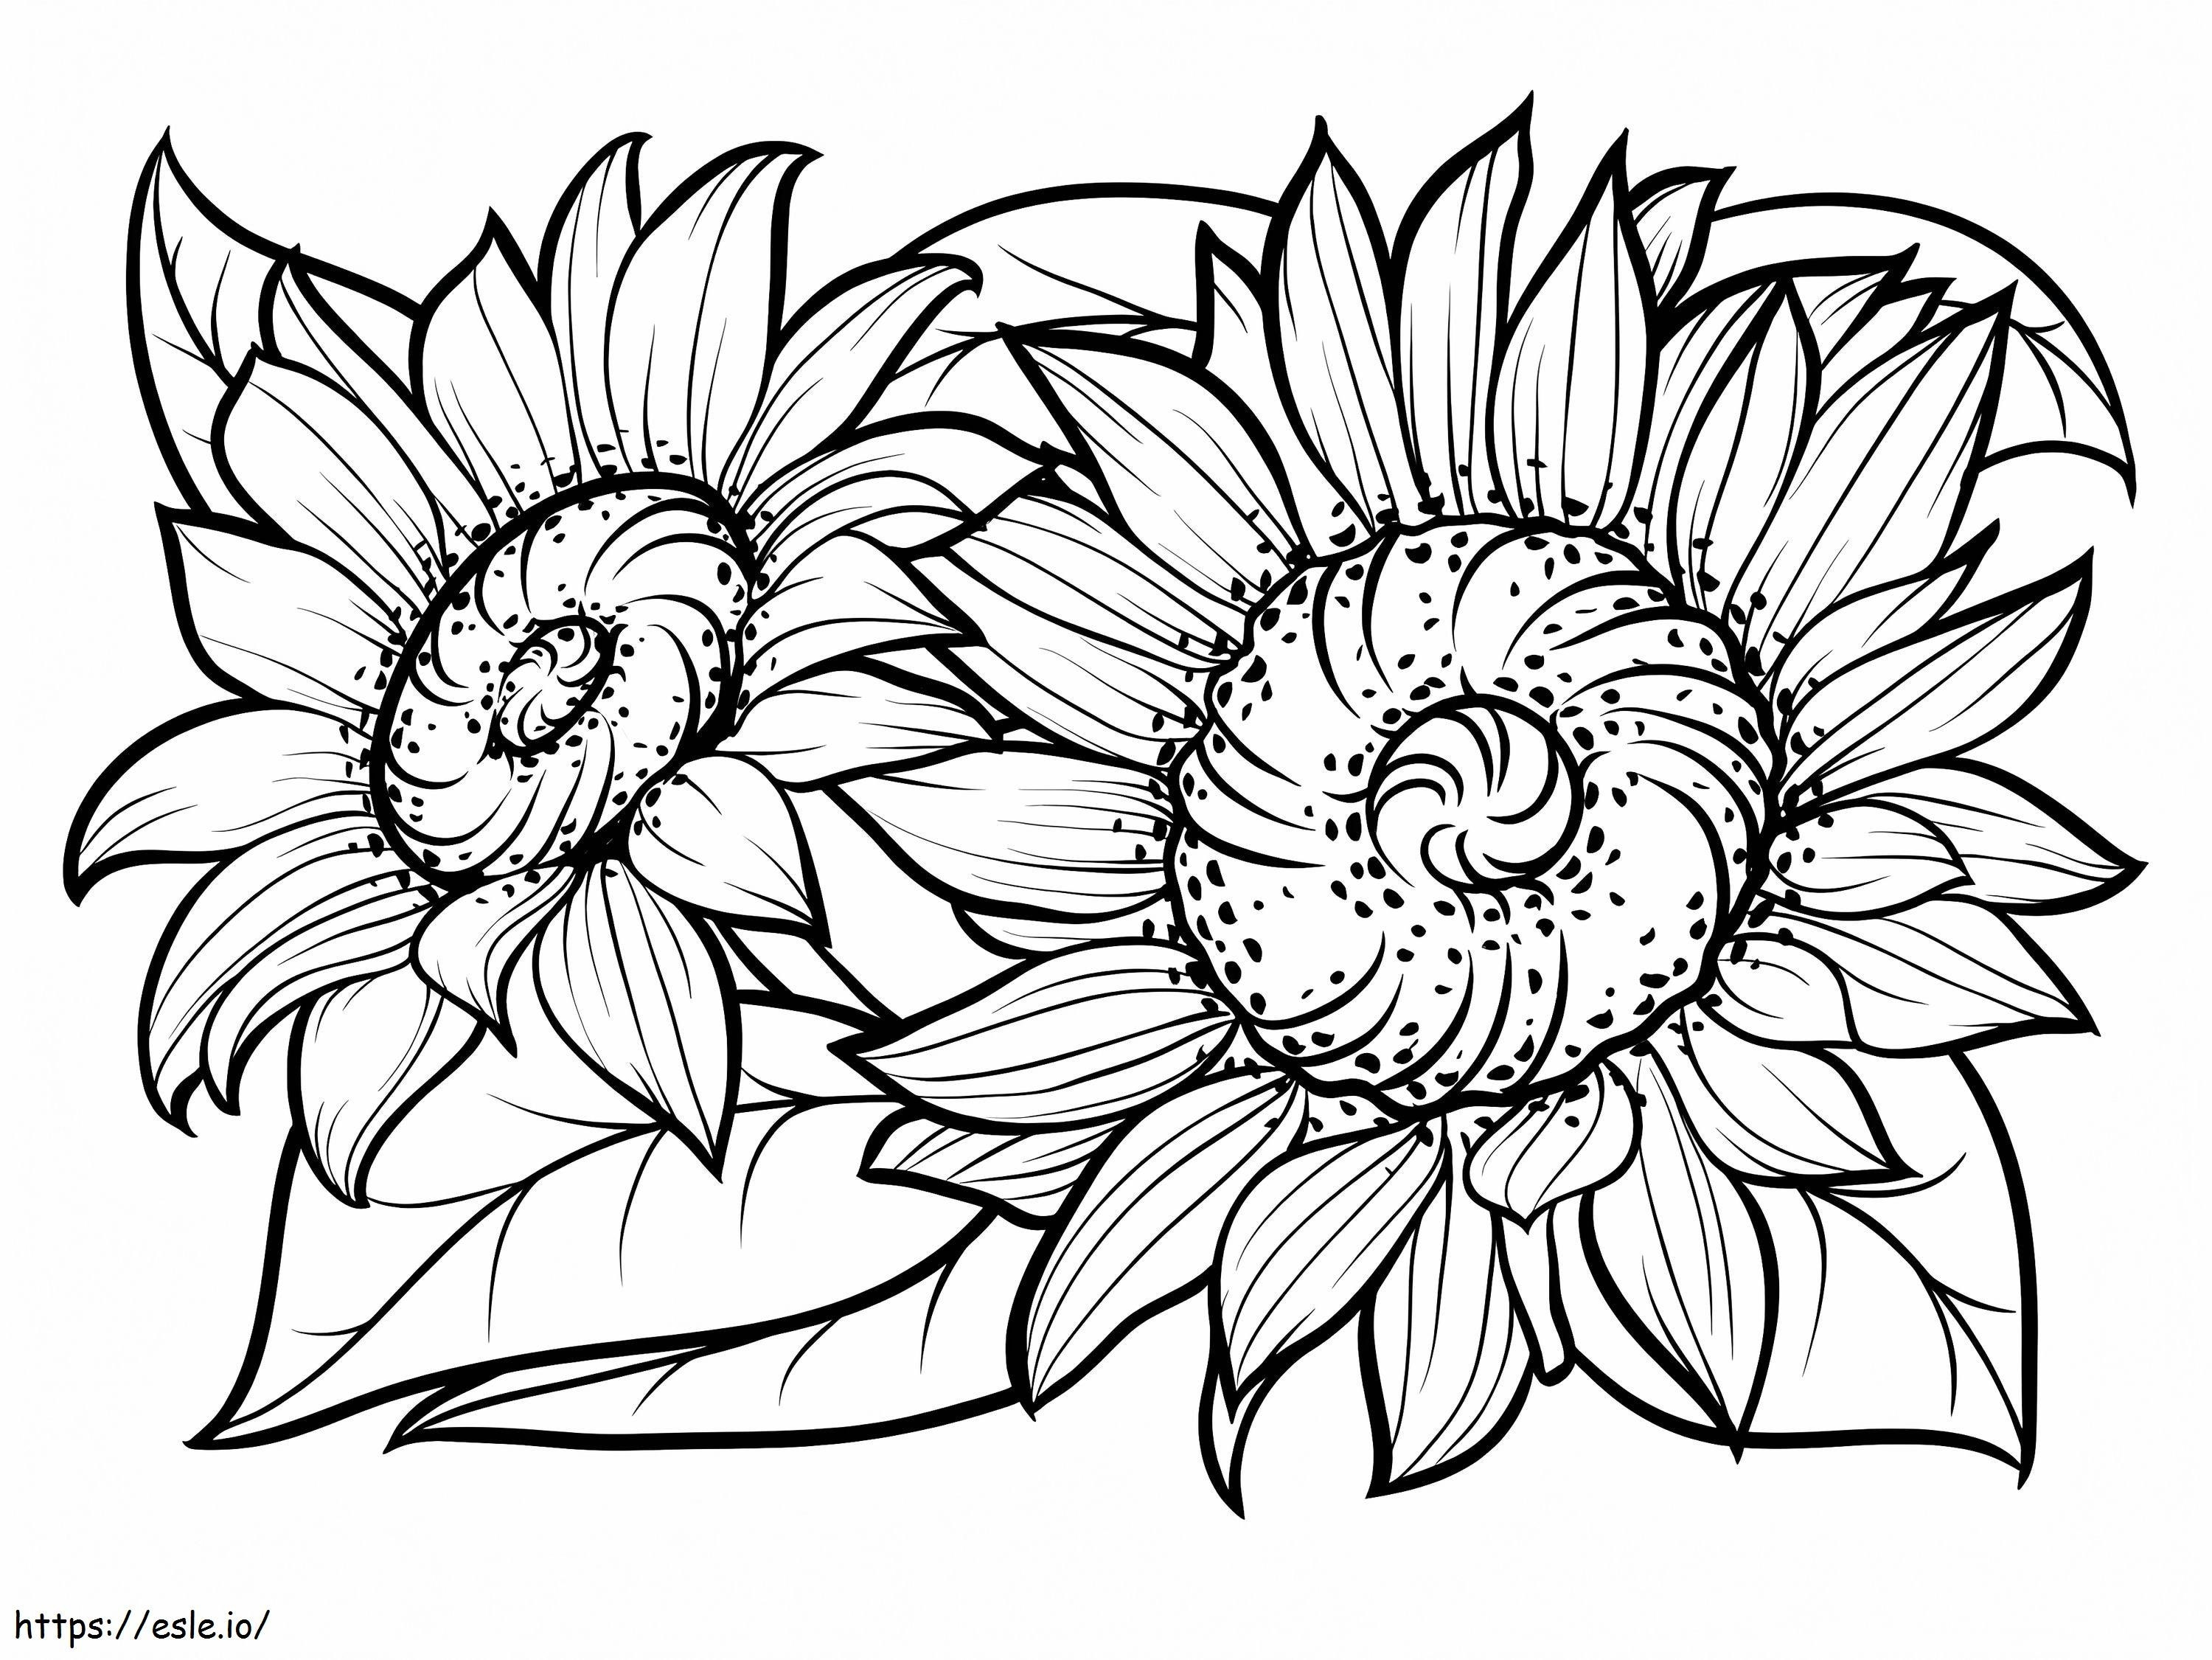 Printable Sunflowers coloring page